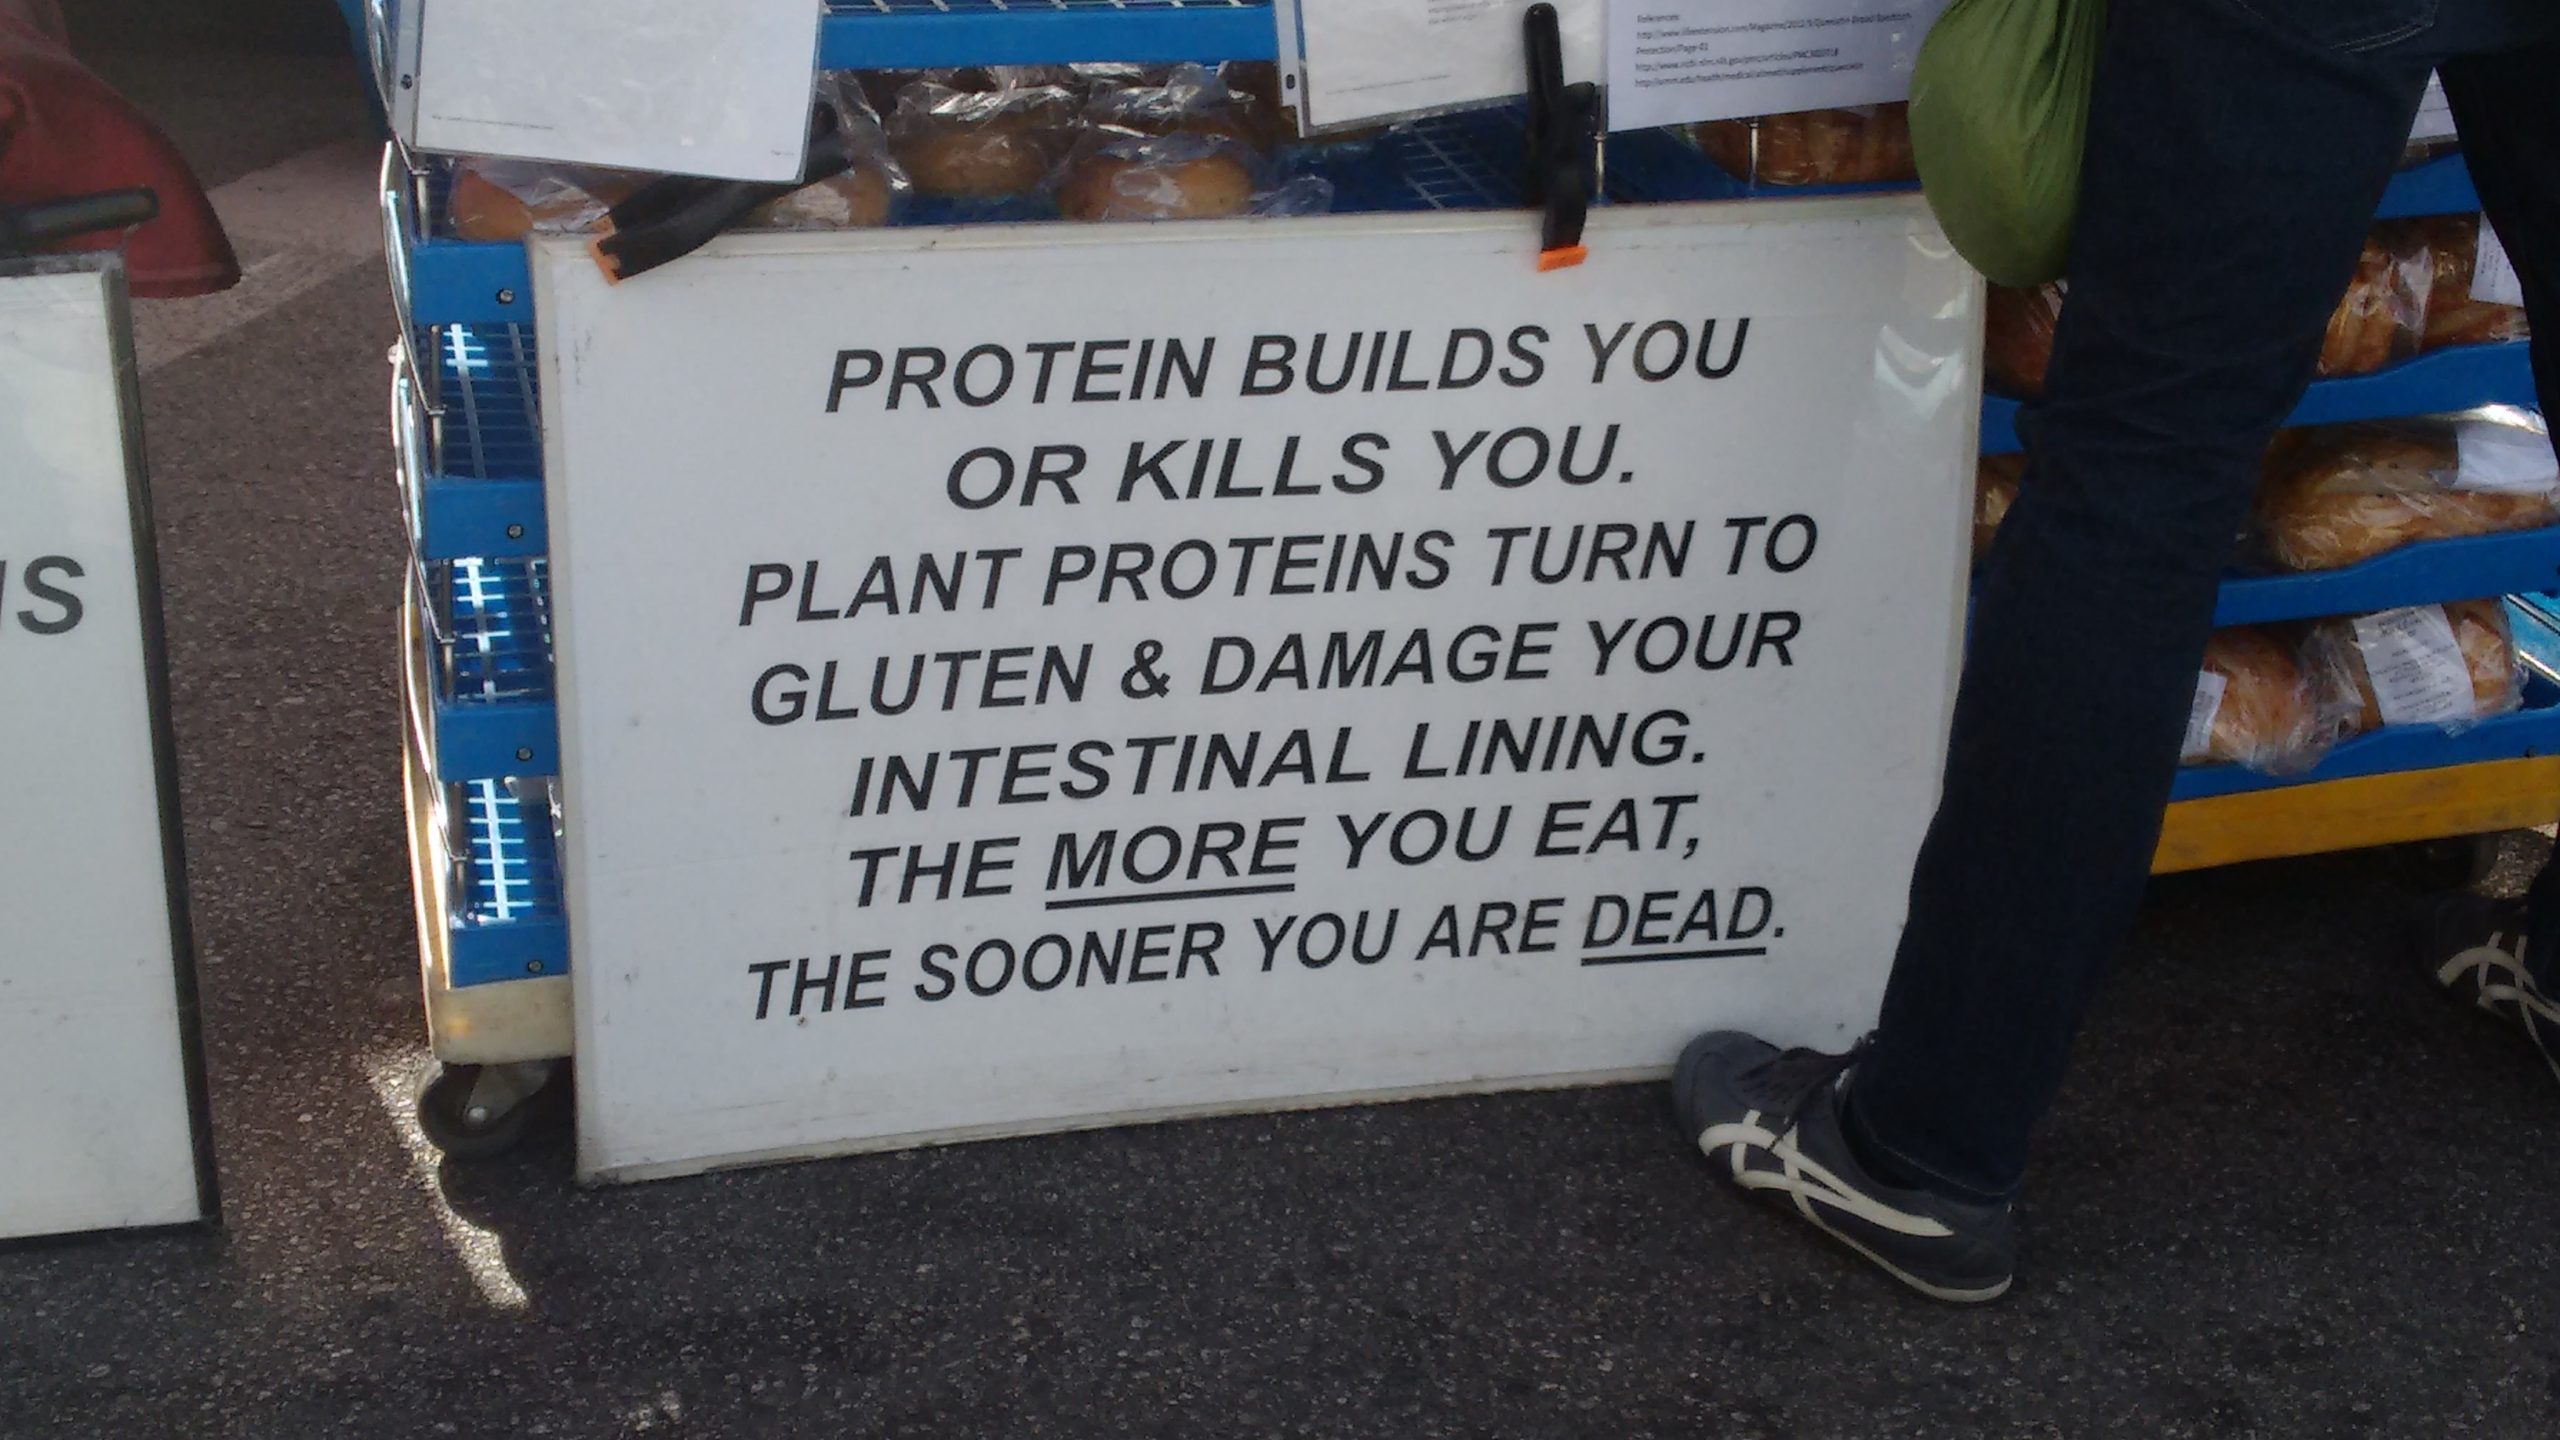 Sign saying Protein builds you or kills you. Plant proteins turn to gluten & damage your intestinal lining. The more you eat, the sooner you are dead.